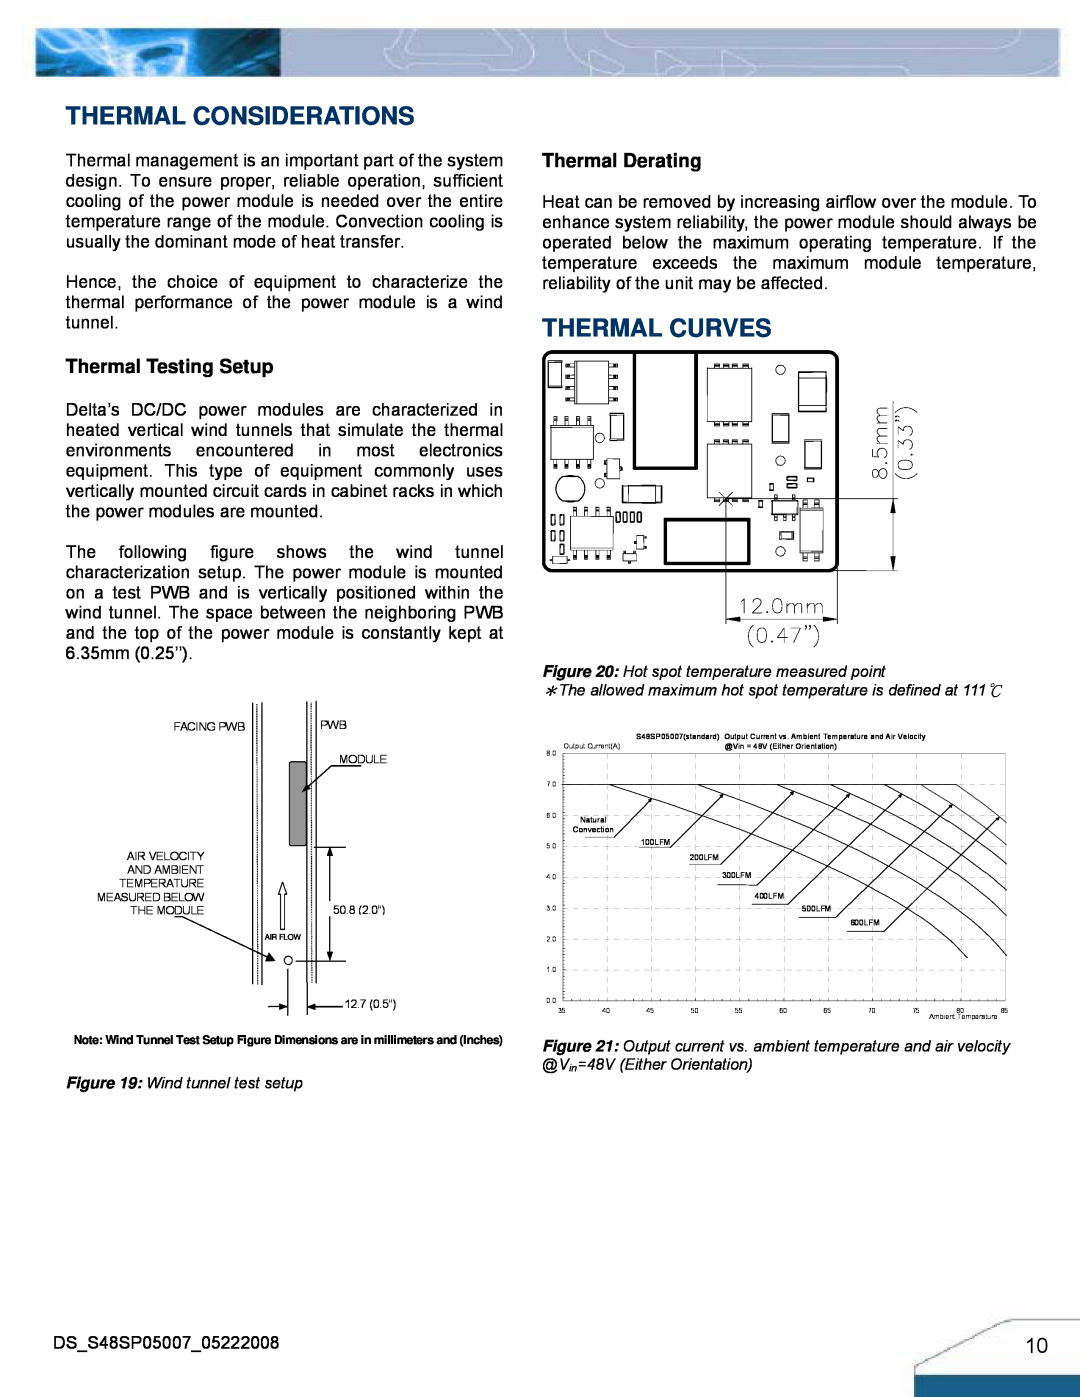 Delta Electronics S48SP manual Thermal Considerations, Thermal Curves, Thermal Testing Setup, Thermal Derating 